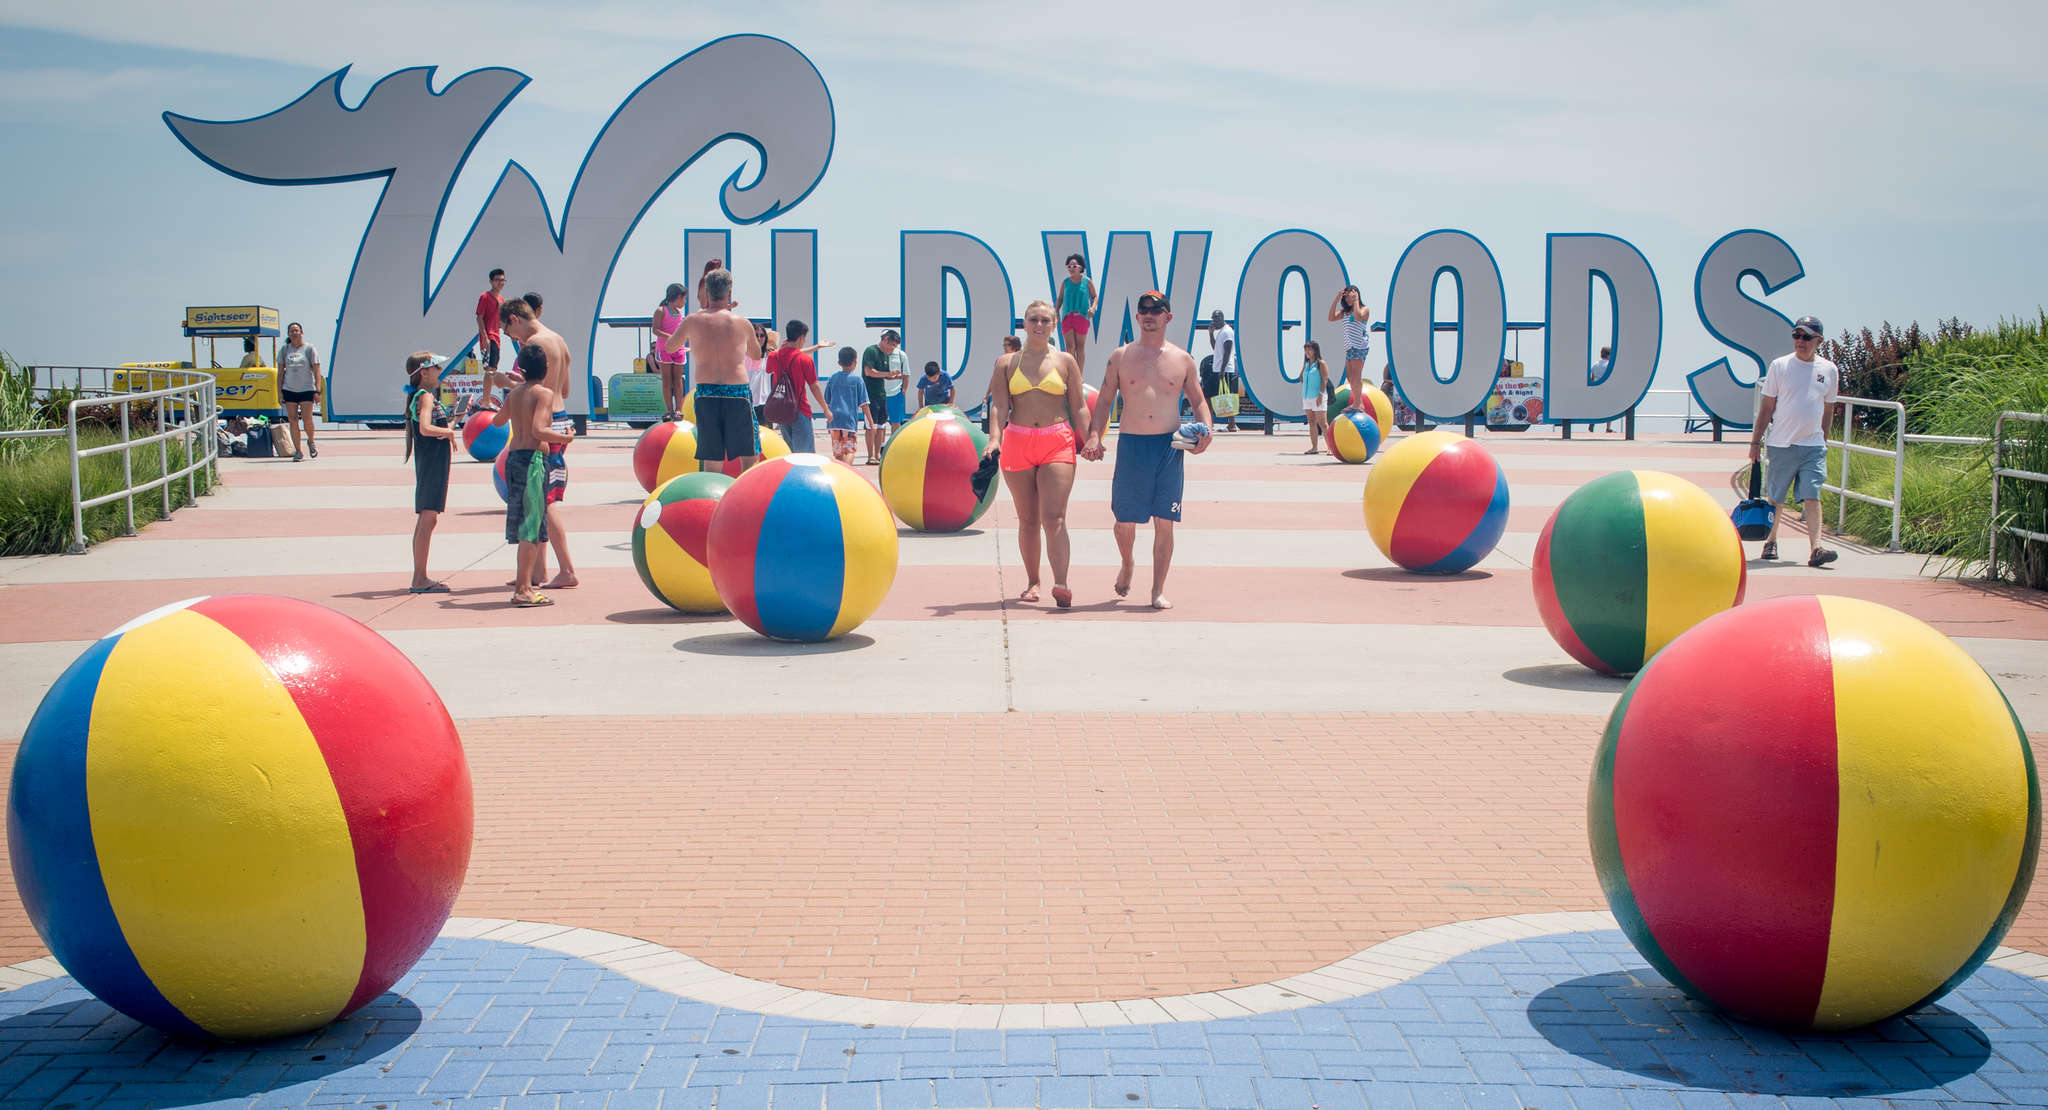 Whats in a name? Everything, says Wildwood